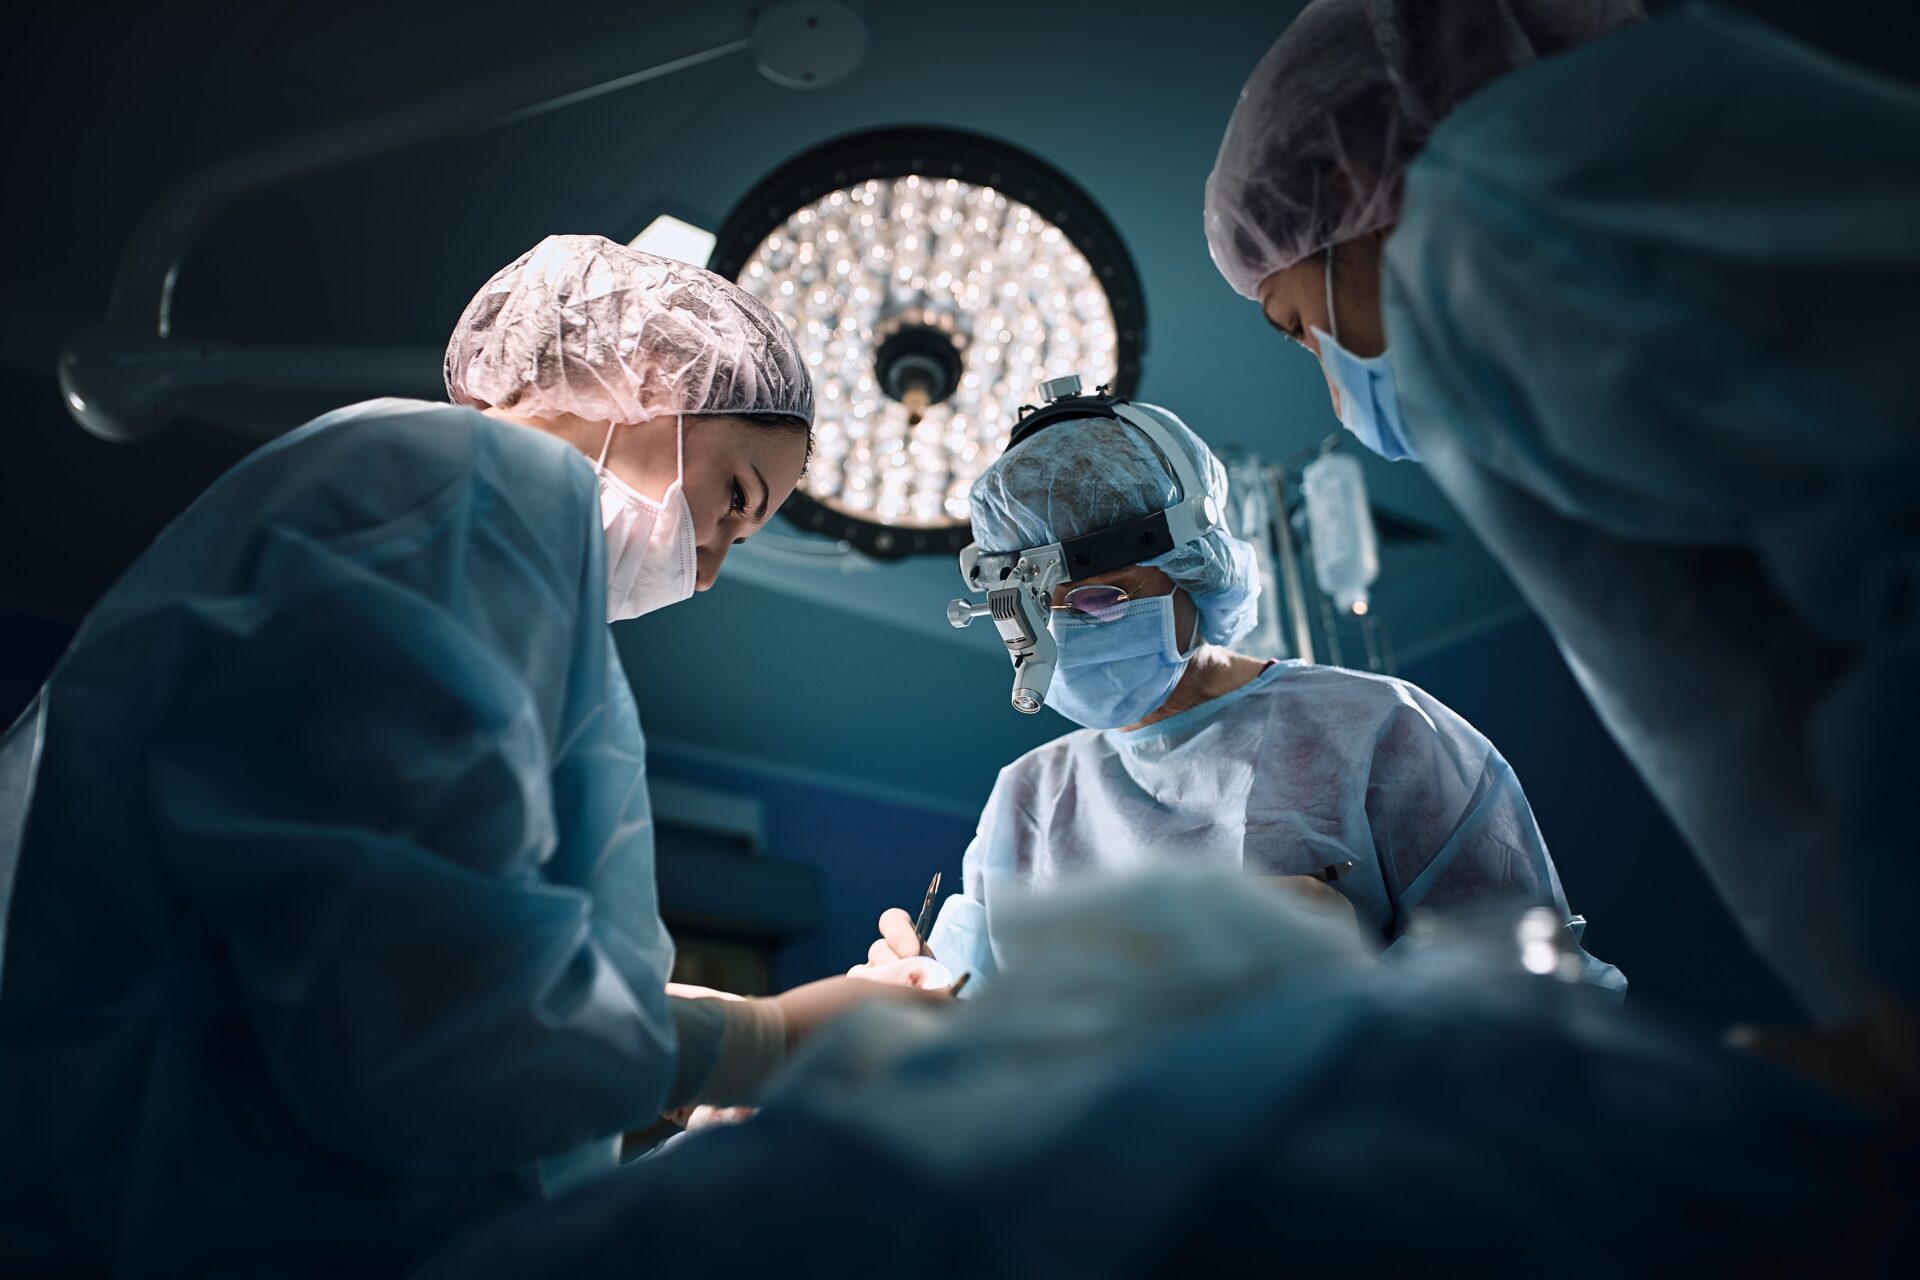 Medical team in the operating room, dark background. The theater of the operating room, an international team of professional doctors in a modern operating room are conducting an operation. Saving lives, modern medicine, blue blue light.